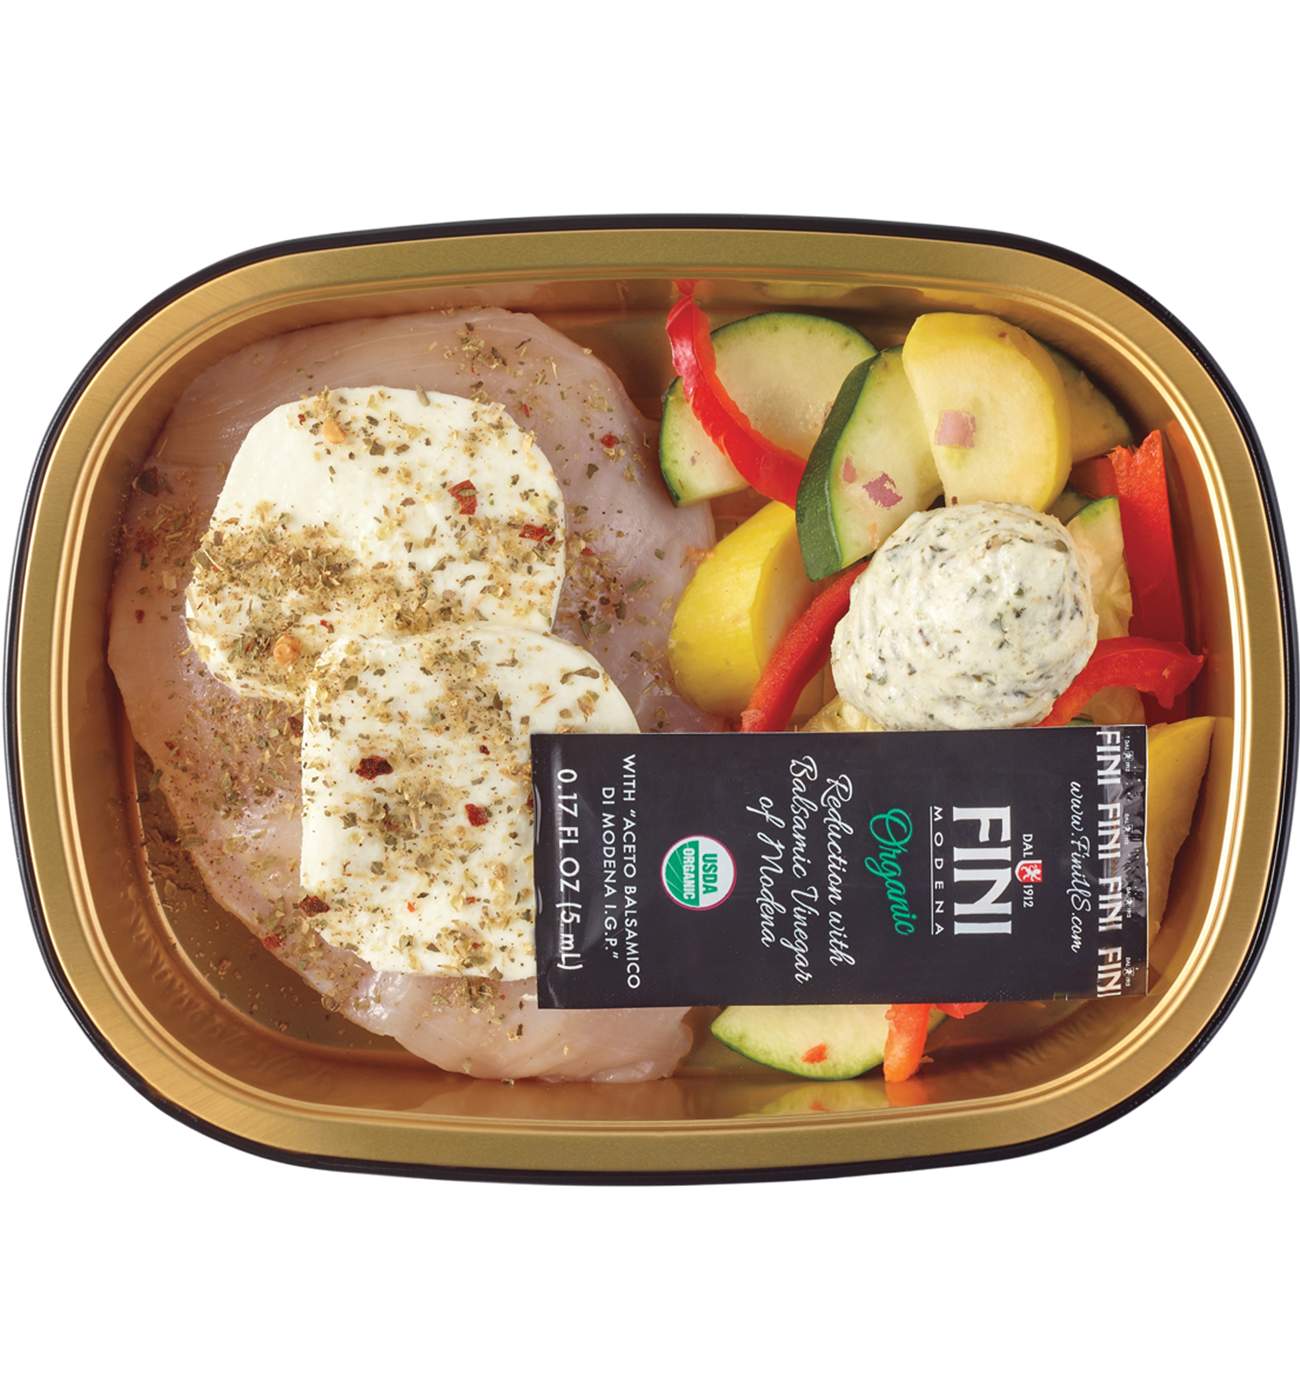 Meal Simple by H-E-B Low-Carb Lifestyle Balsamic Mozzarella Chicken & Squash; image 1 of 3